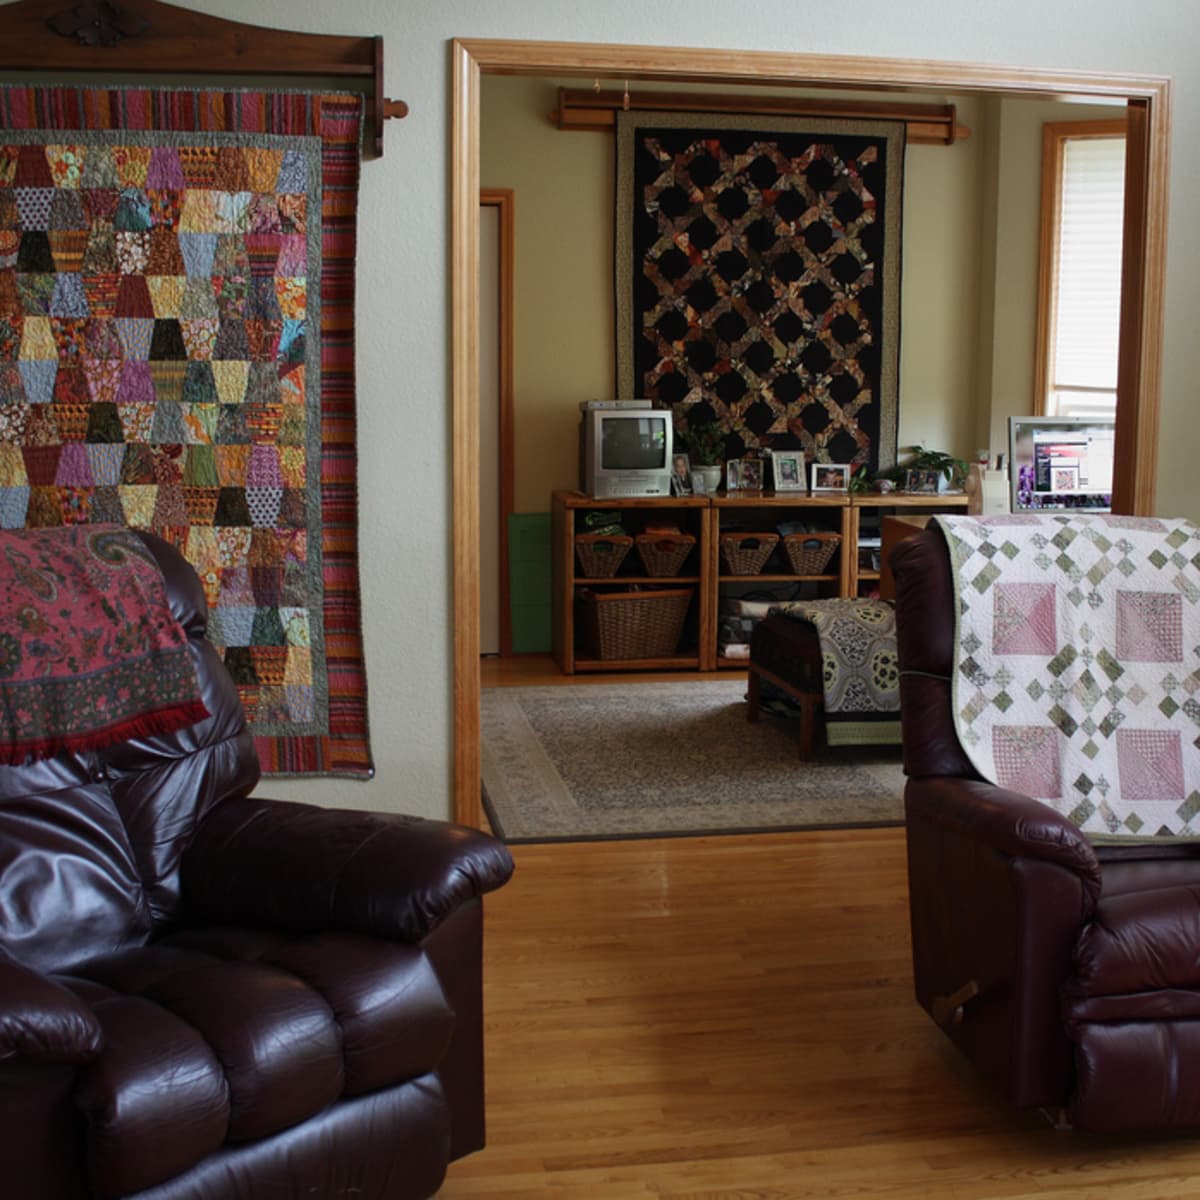 How to Decorate Your Home With Quilts: Quilt Display Ideas - Dengarden